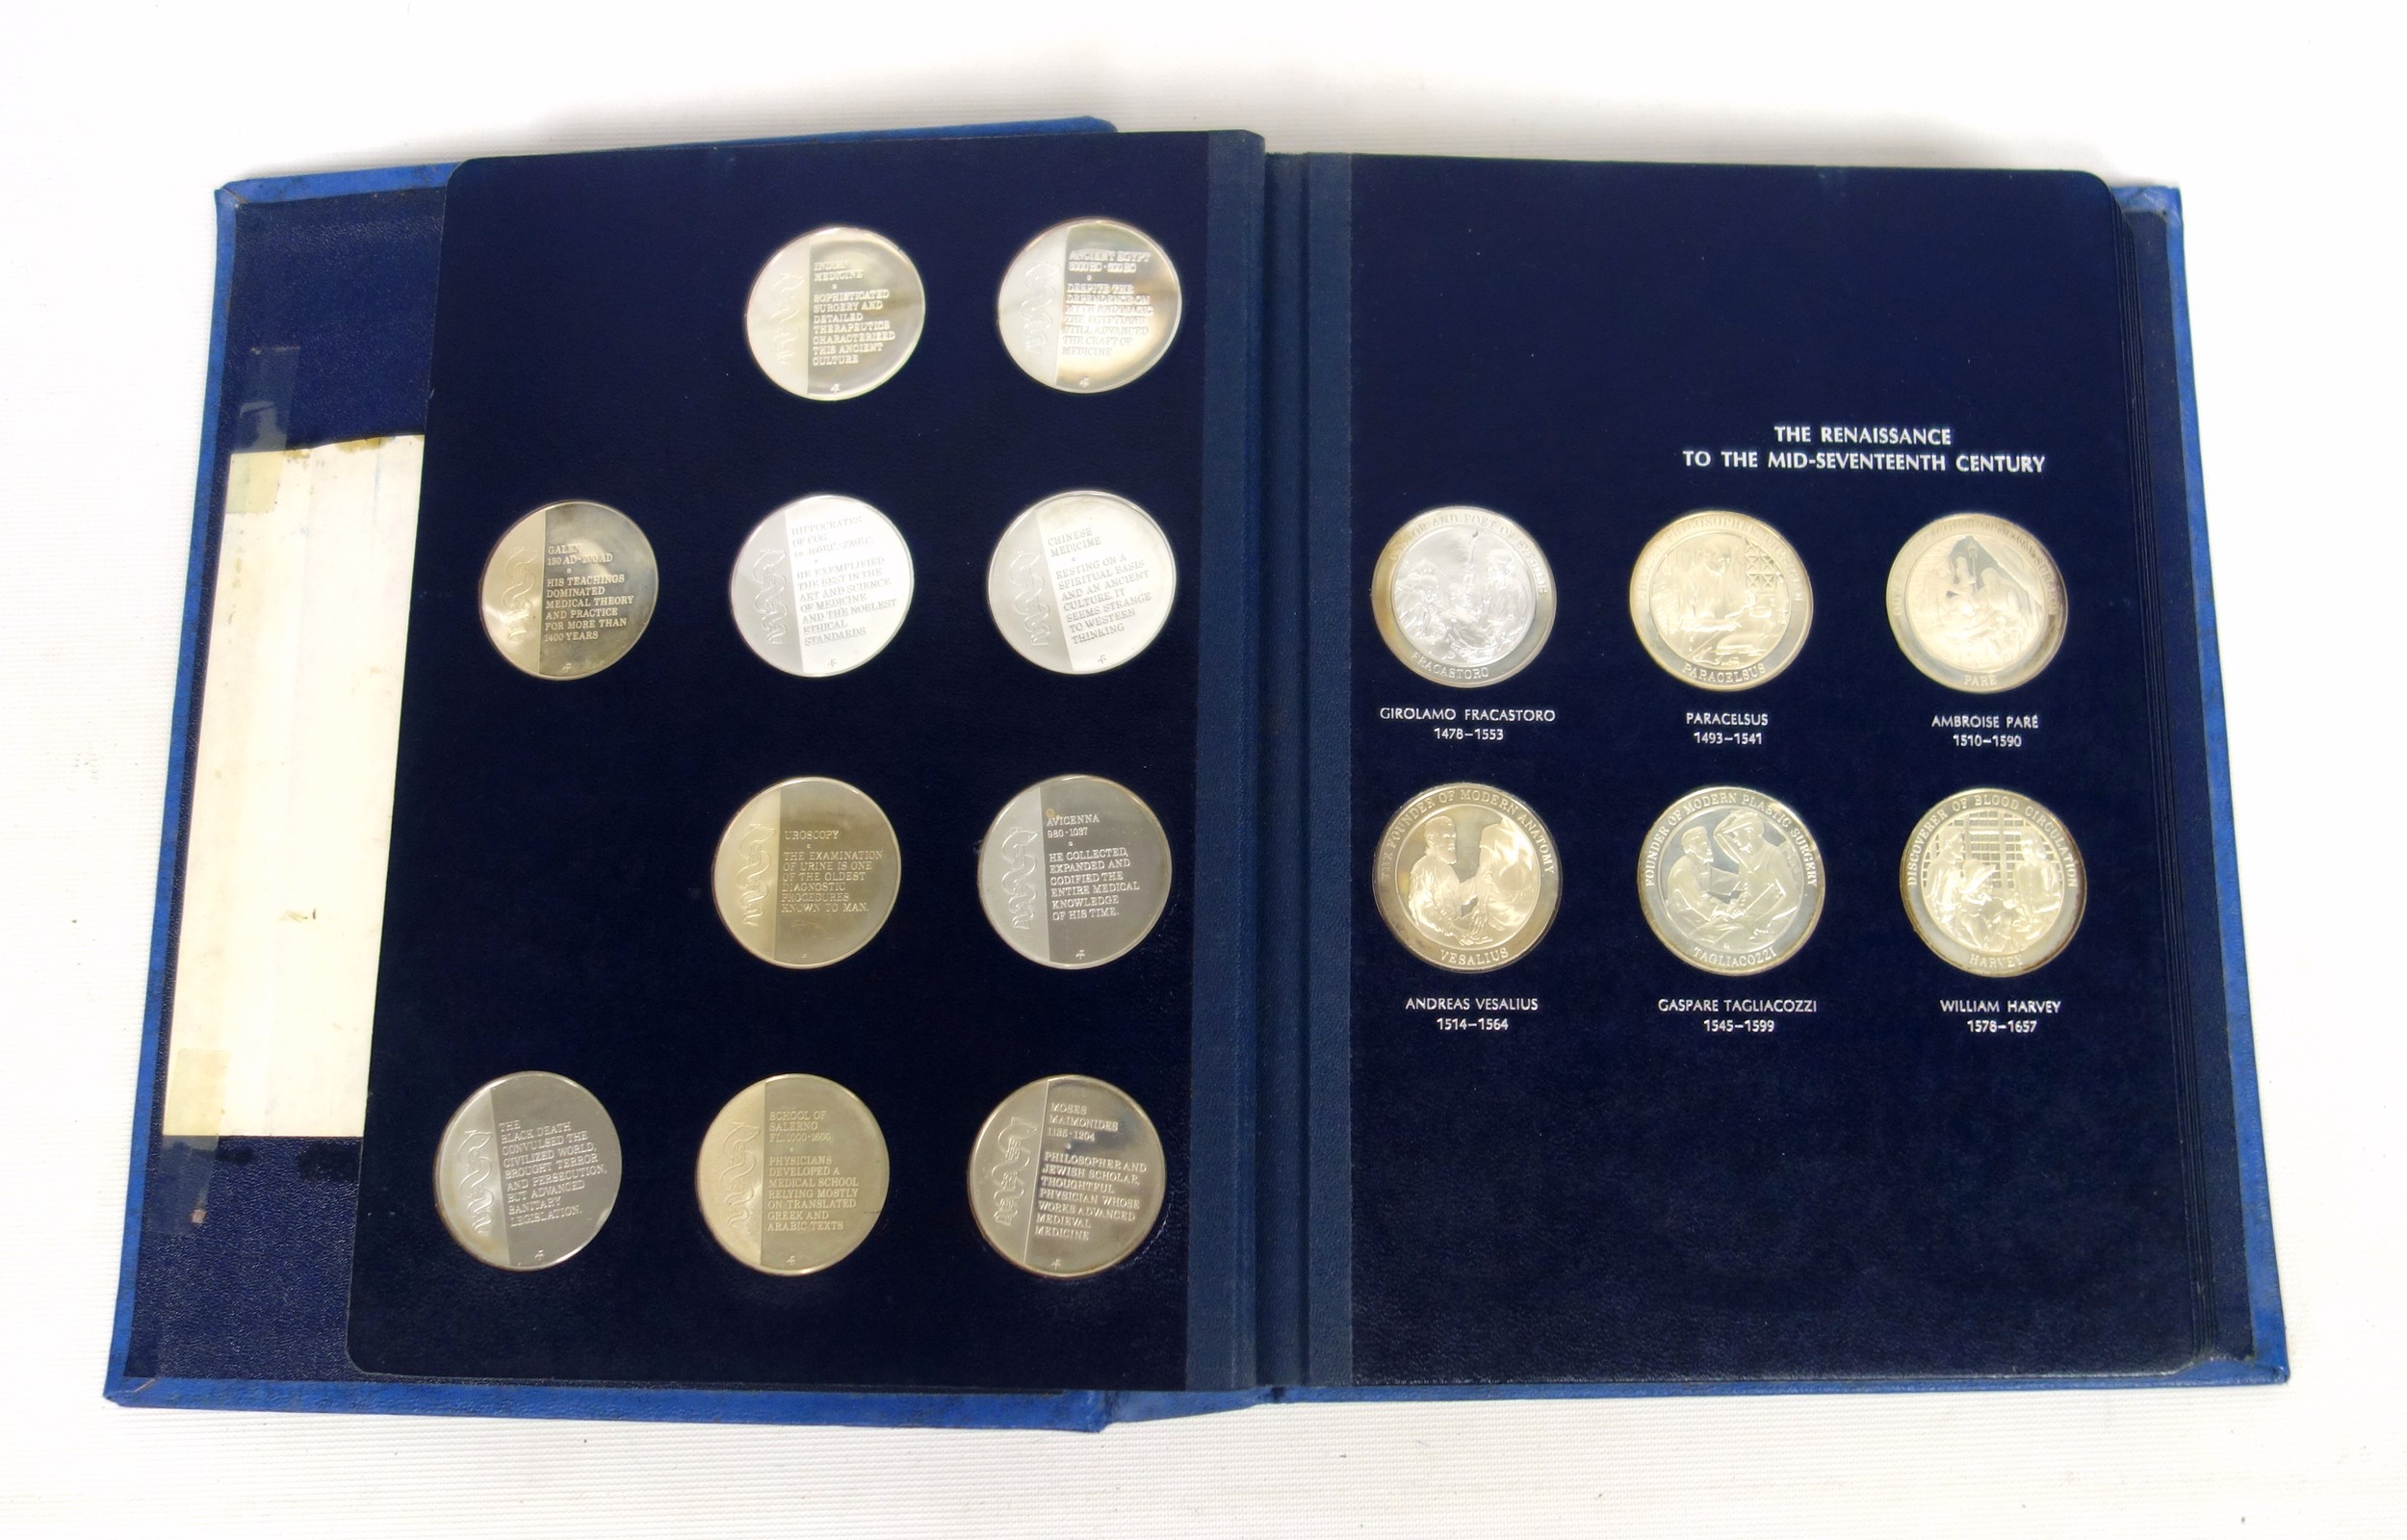 Systema Sciences Ltd. set of 66 Medallic History of Medicine silver special mint finish medals, - Image 4 of 11